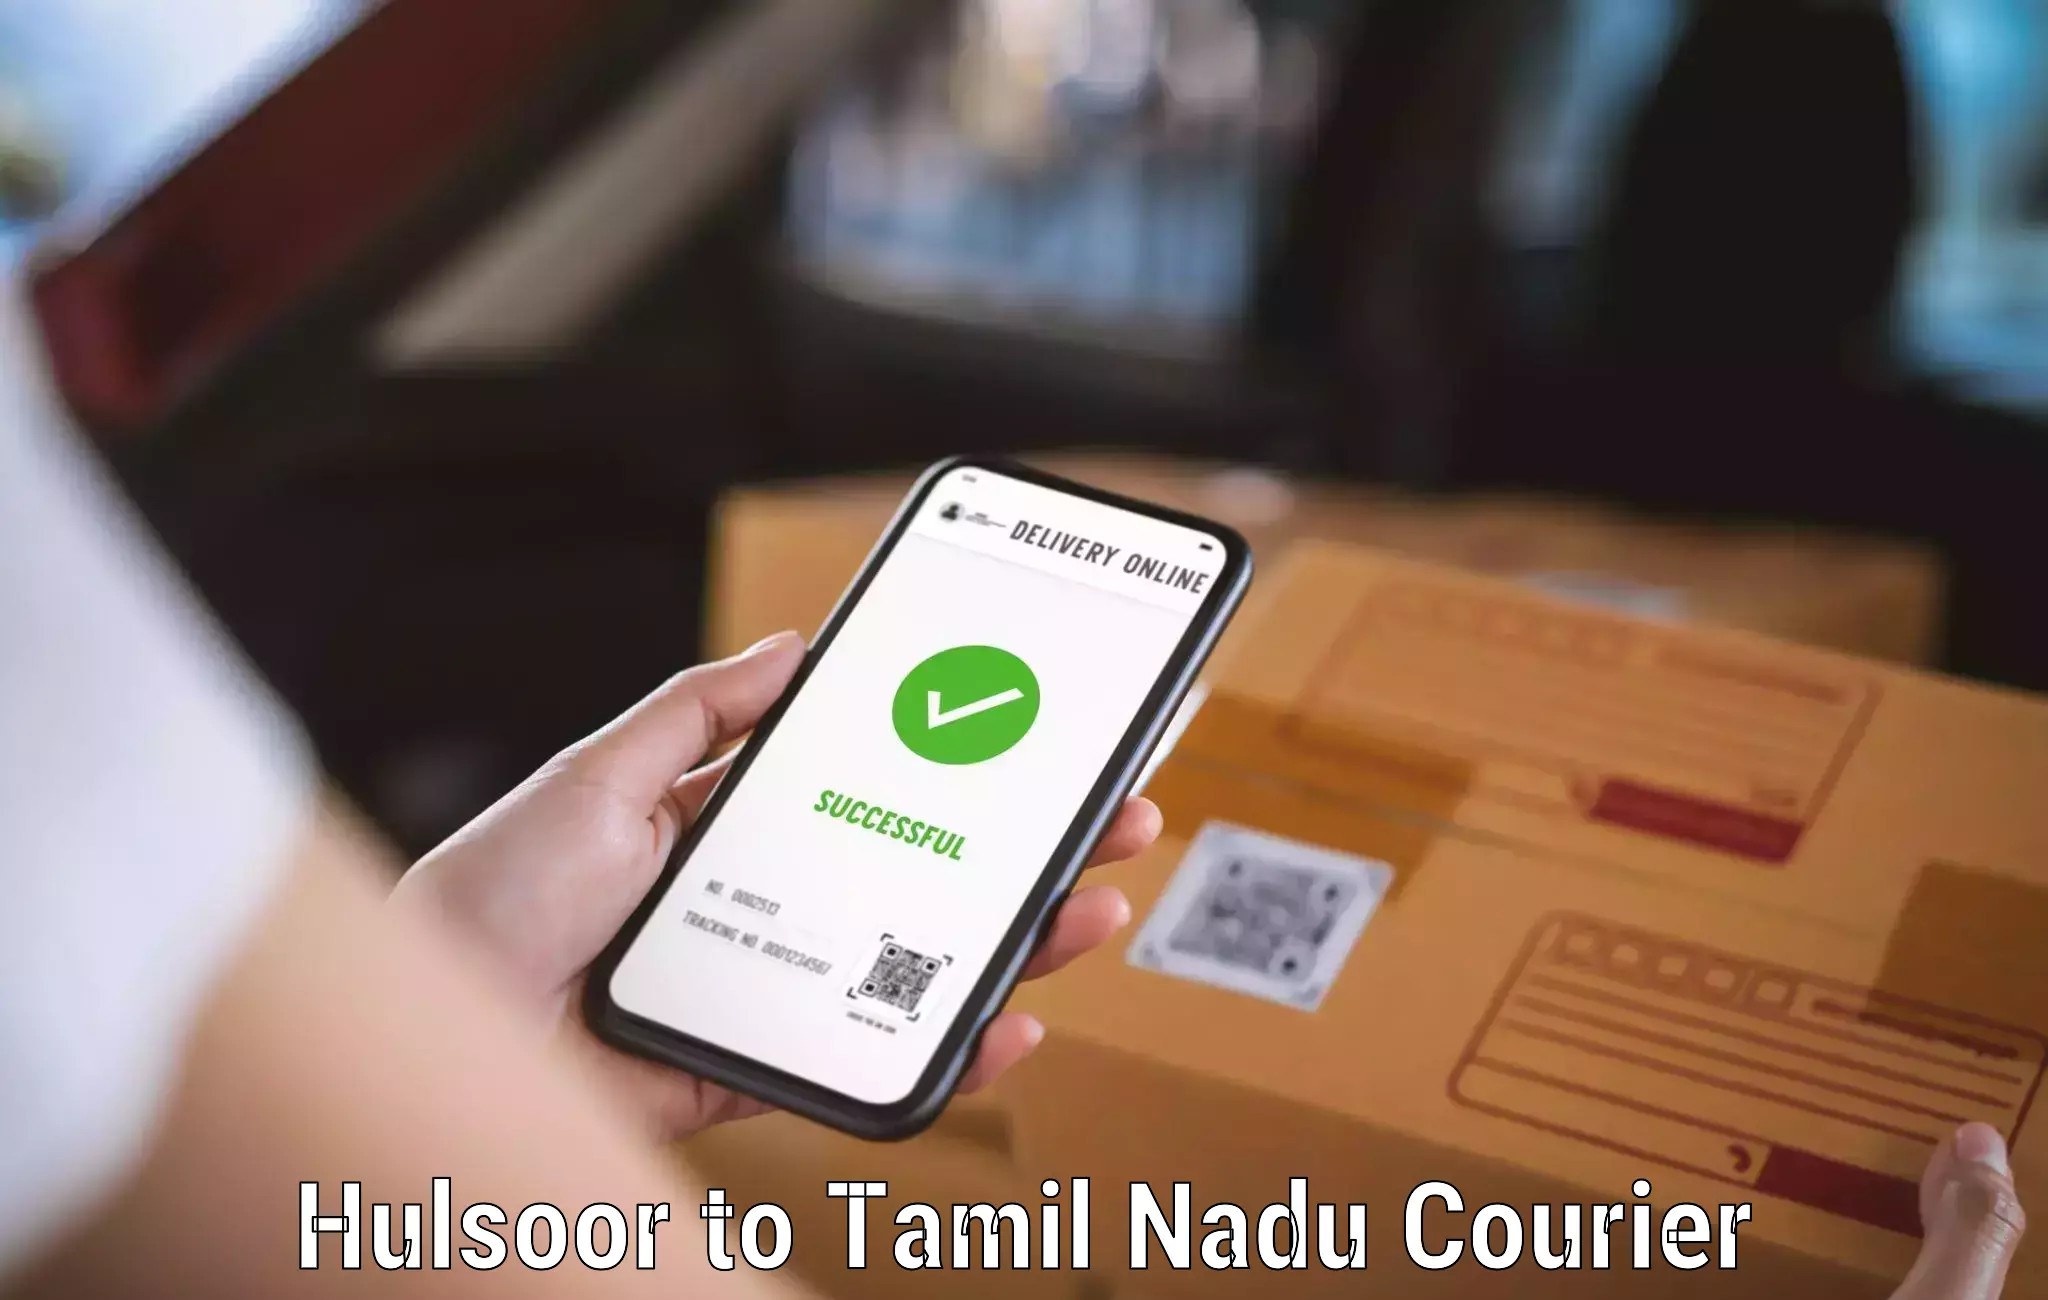 Advanced delivery network Hulsoor to Tamil Nadu